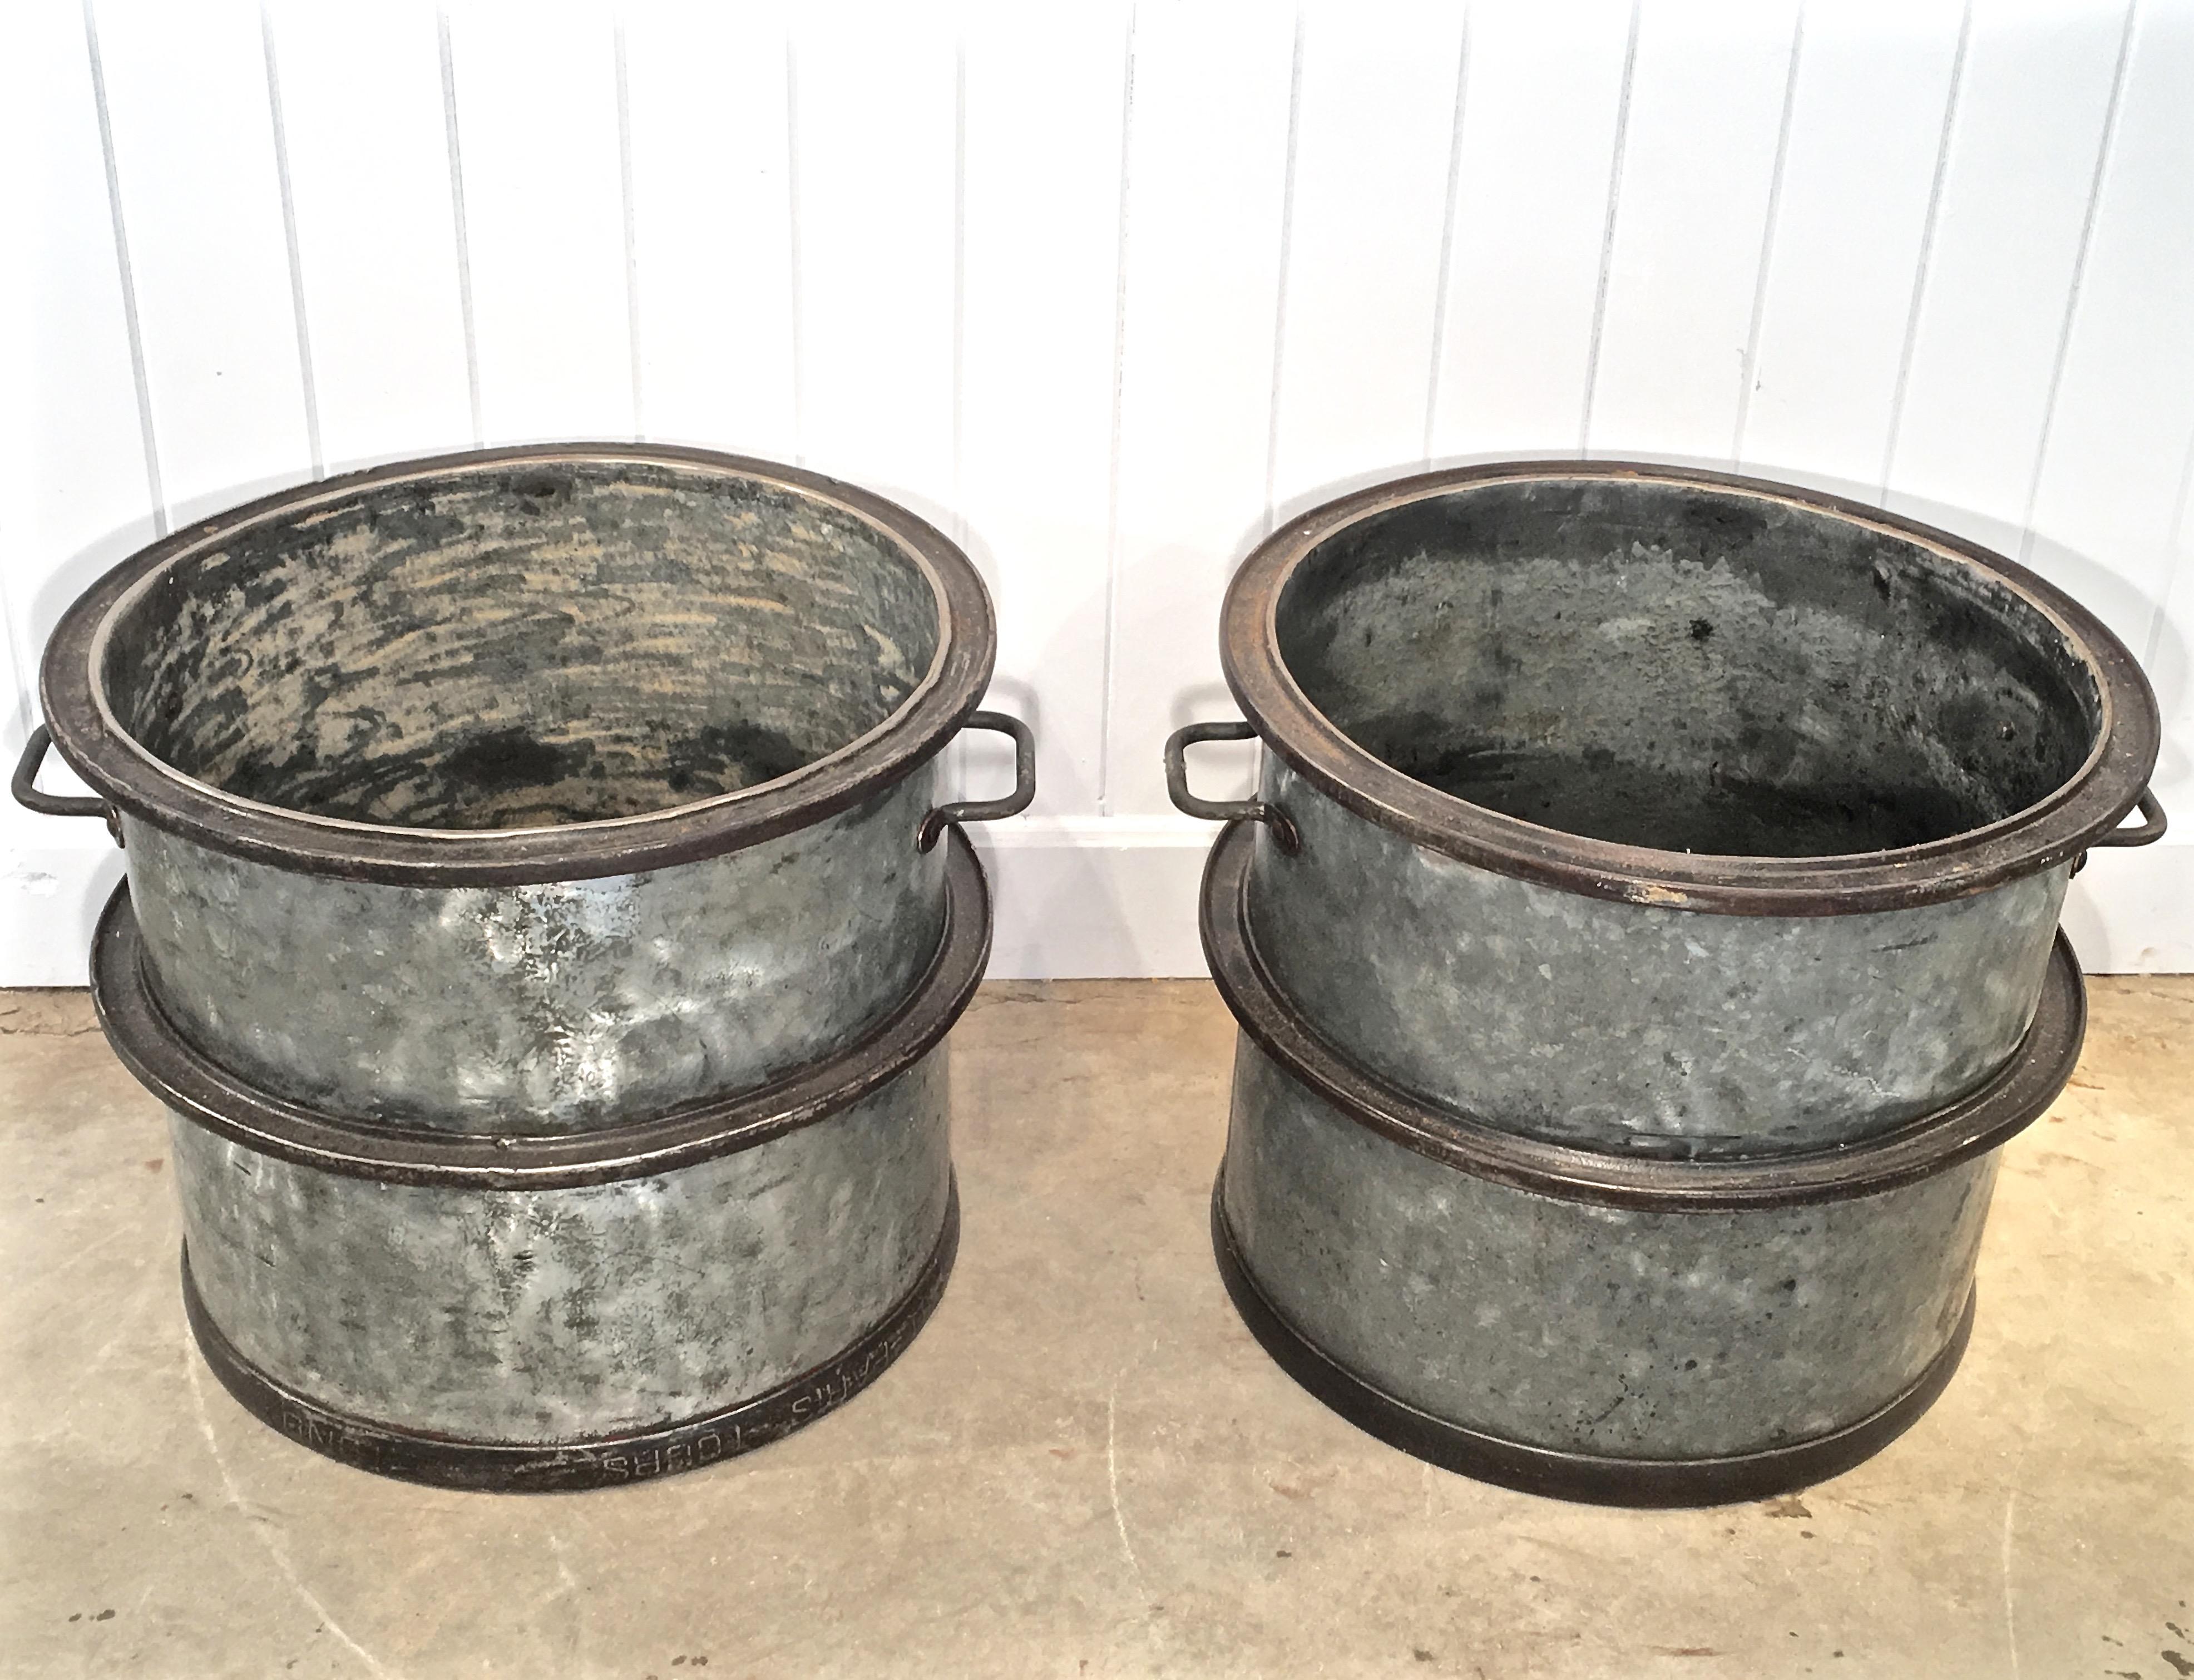 These heavy polished steel tubs are simply fabulous! Made of heavy industrial galvanized steel with original cast iron rims and handles, they can handle huge plantings, including topiary. Because they are galvanized, you never have to worry about